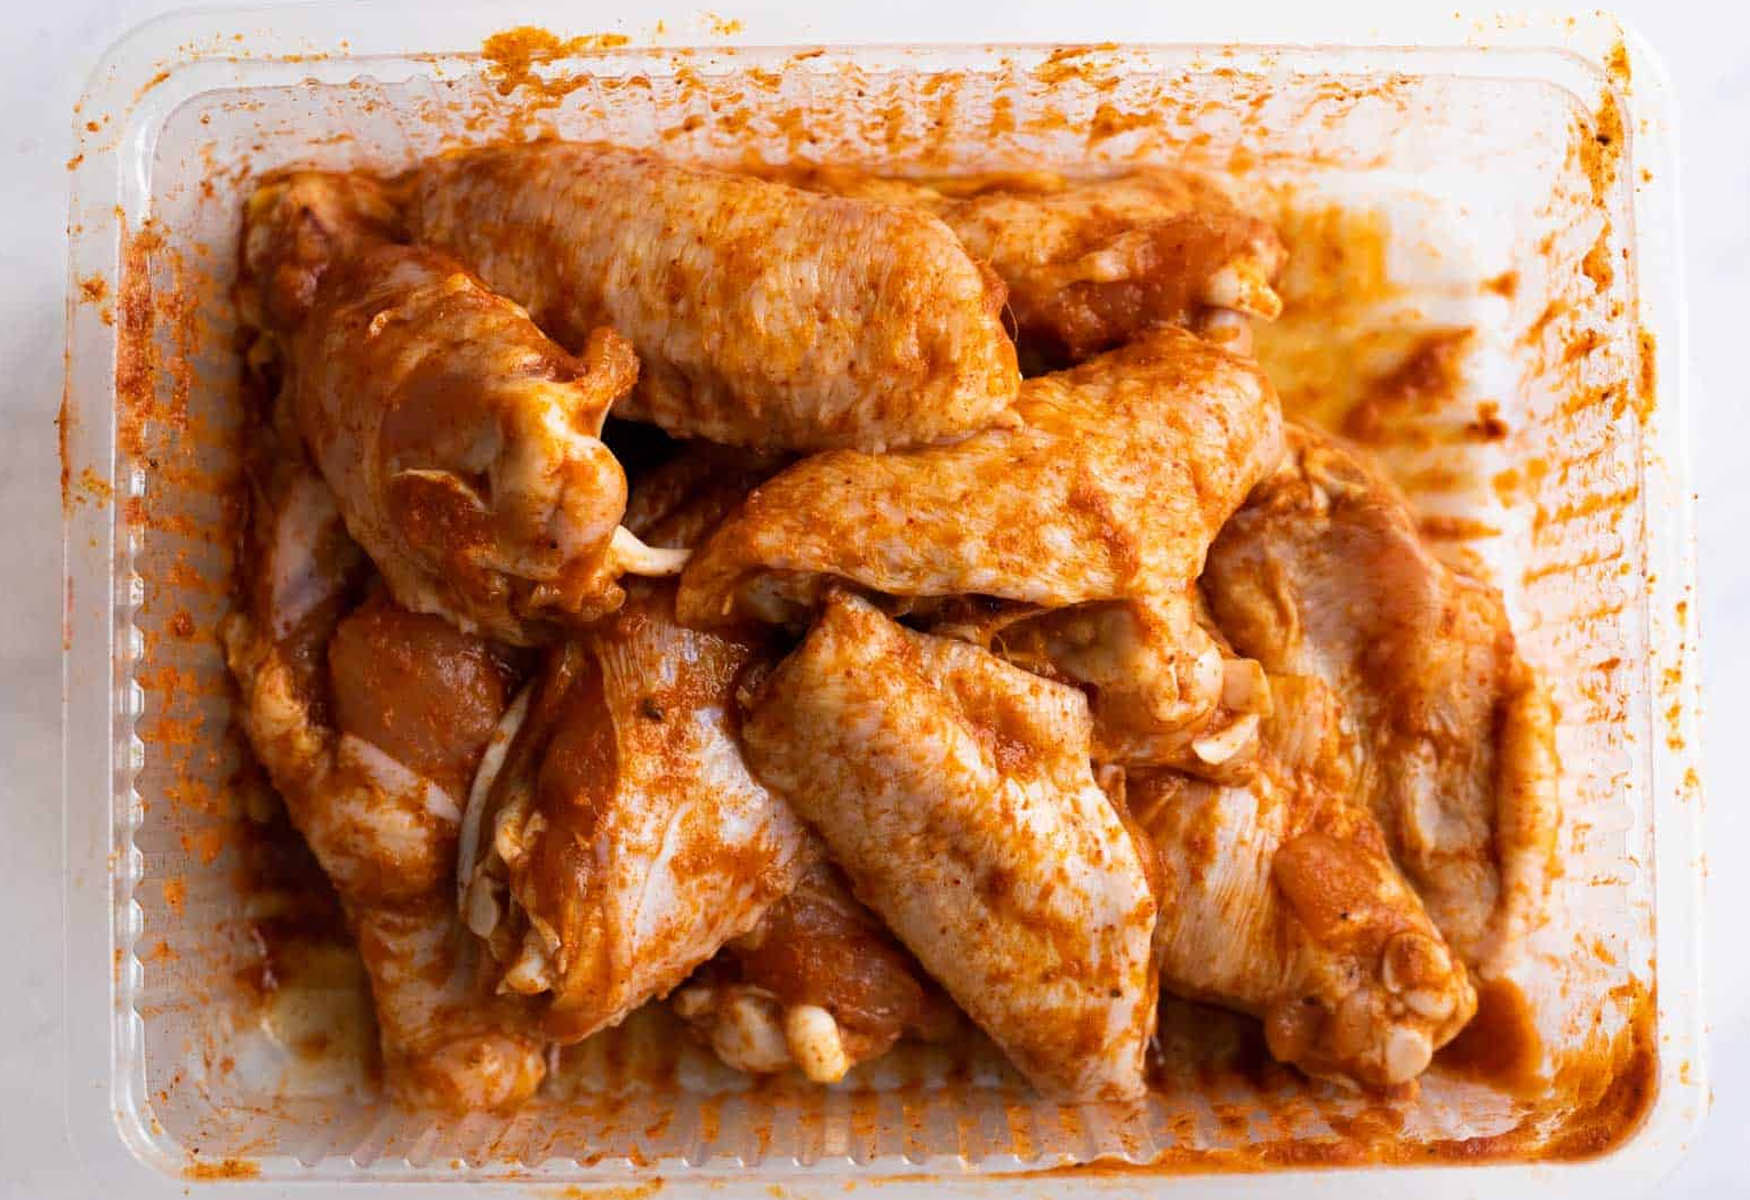 5 easy steps to make barbecue chicken wings